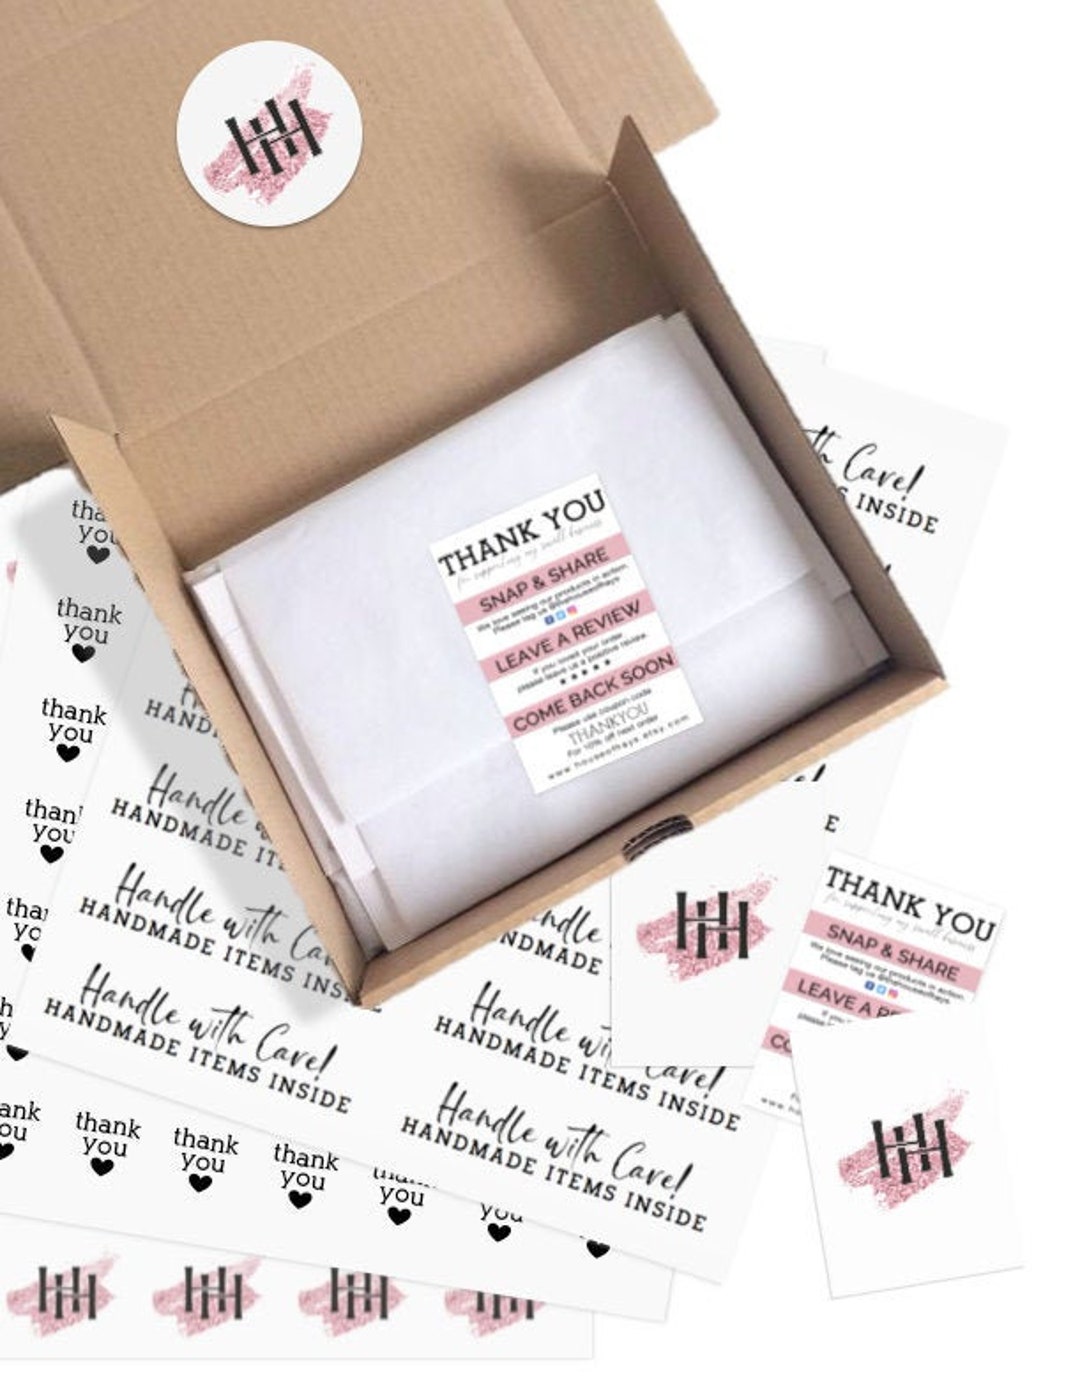 P A C K A G I N G  Small business packaging ideas, Small business packaging,  Packaging ideas business